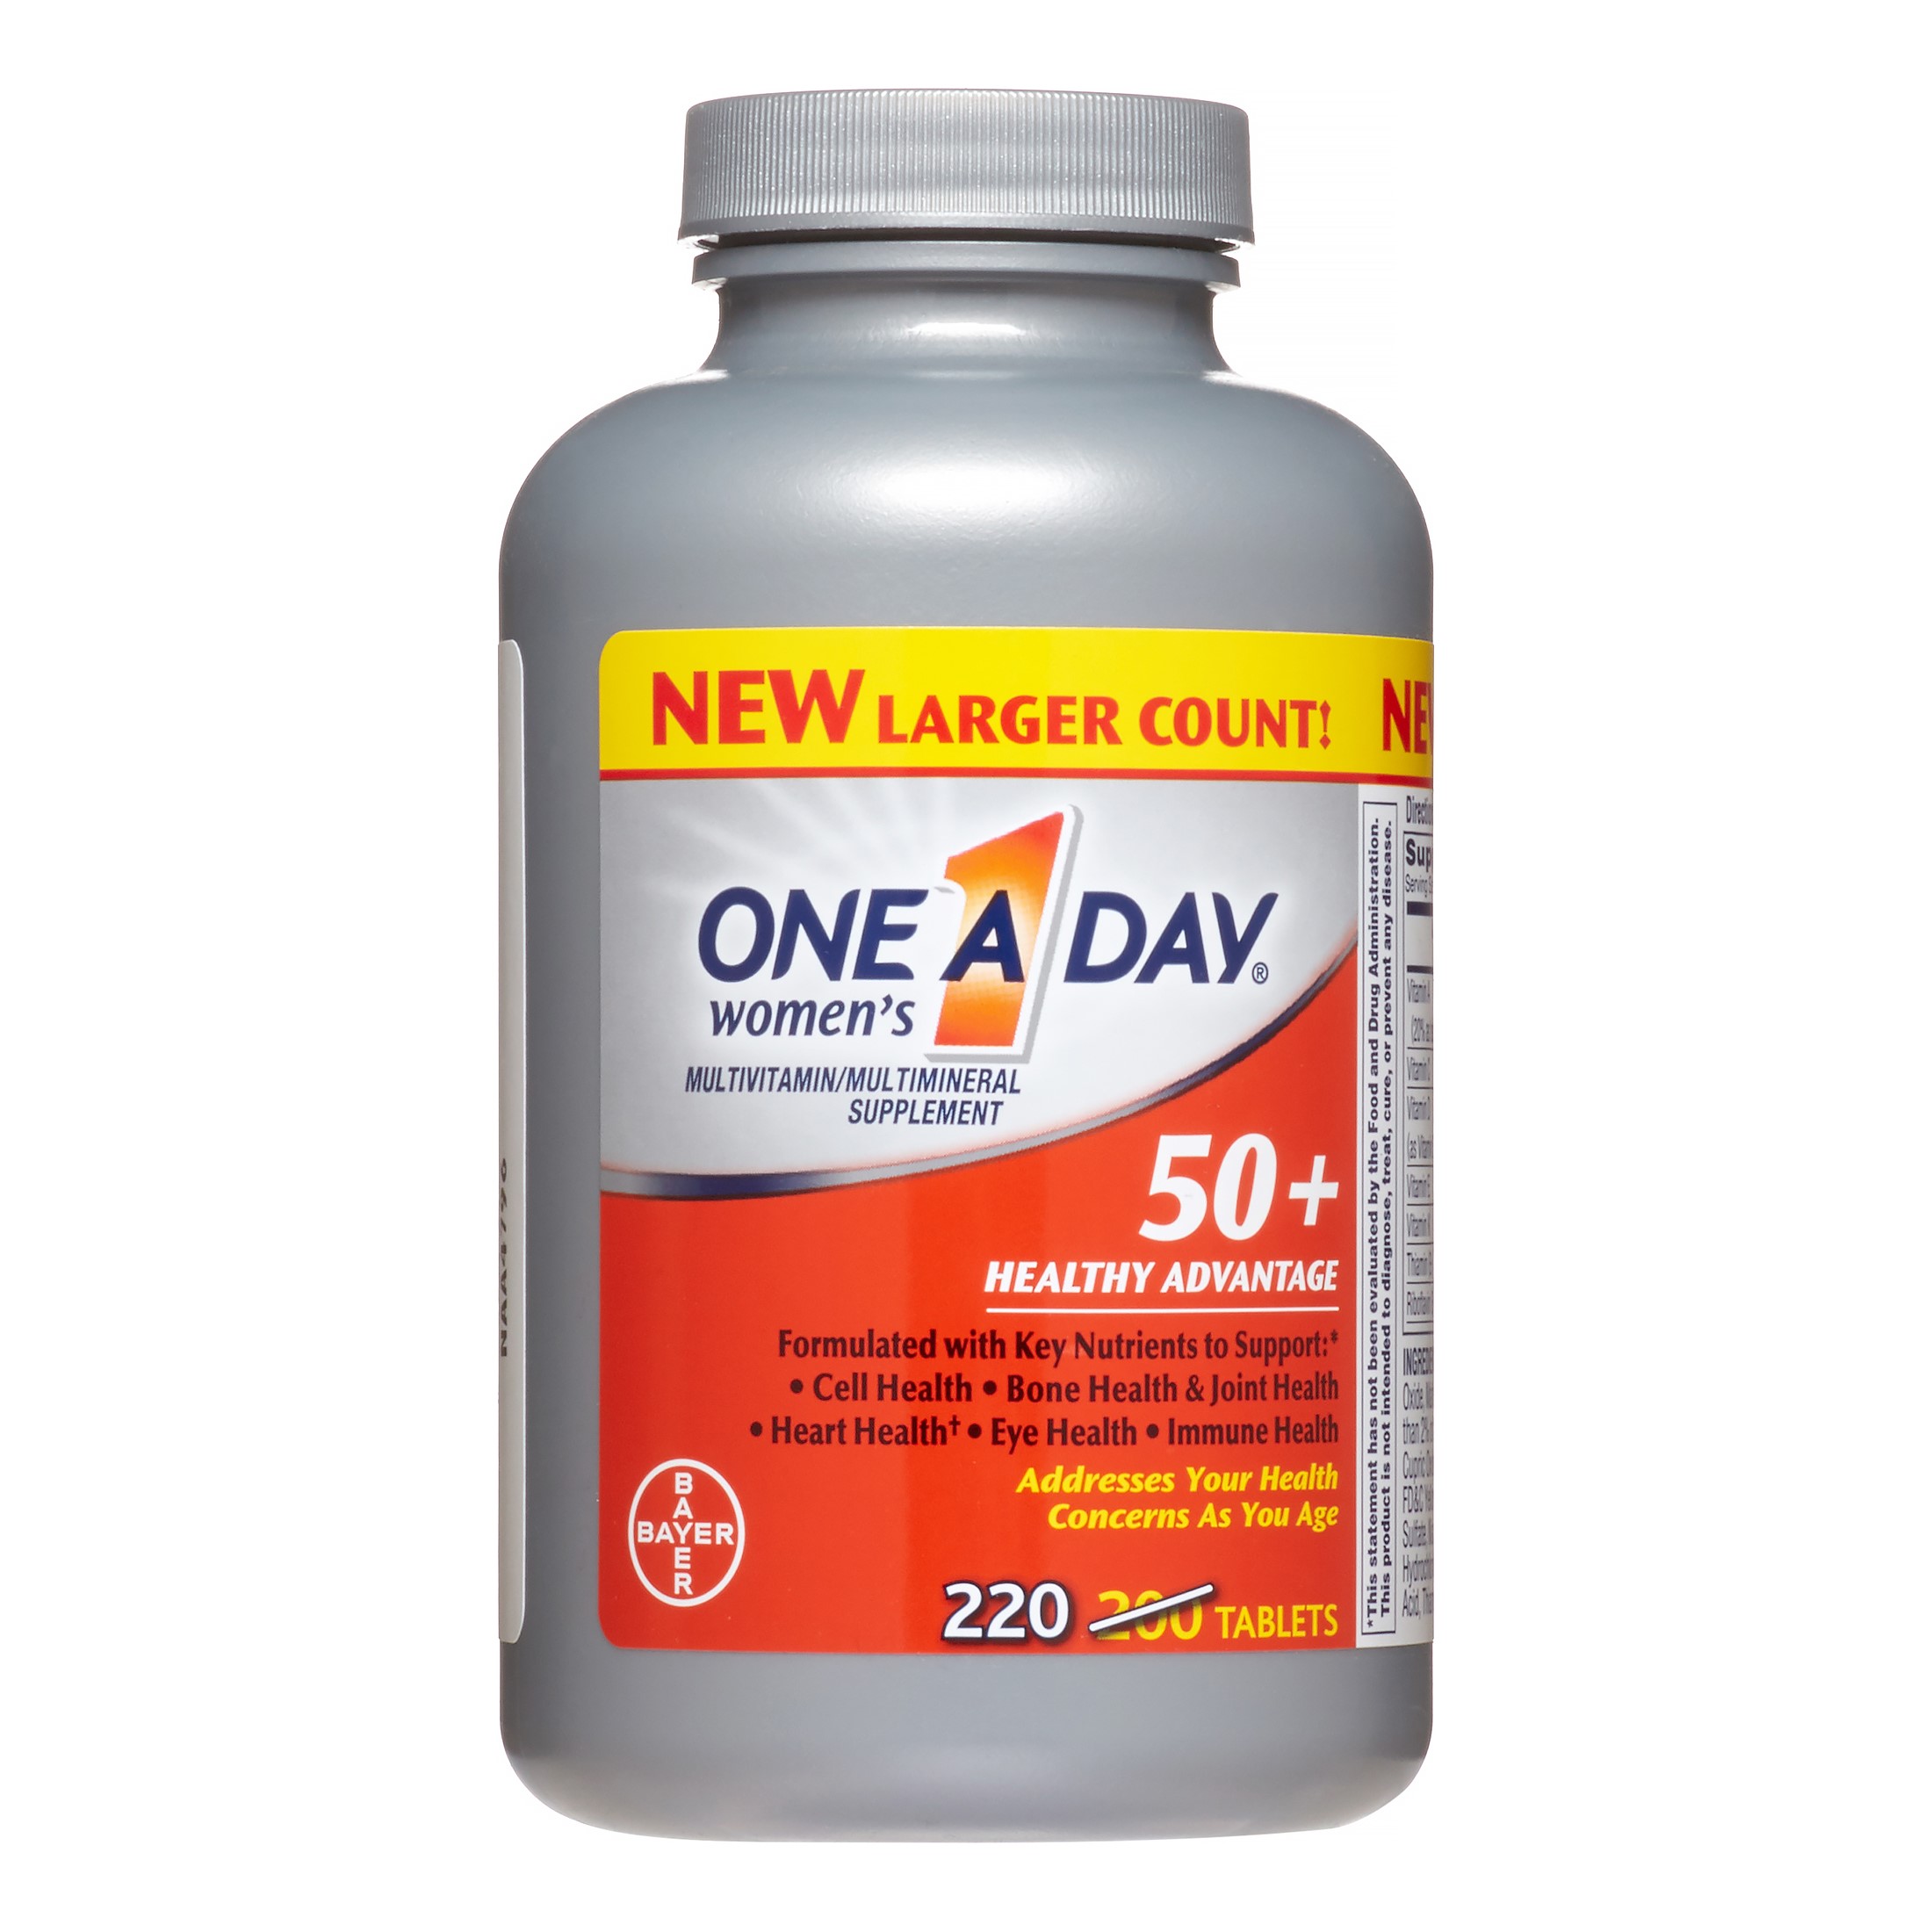 One A Day Women's 50+ Healthy Advantage Multivitamin Tablets, 220 Ct - image 1 of 2